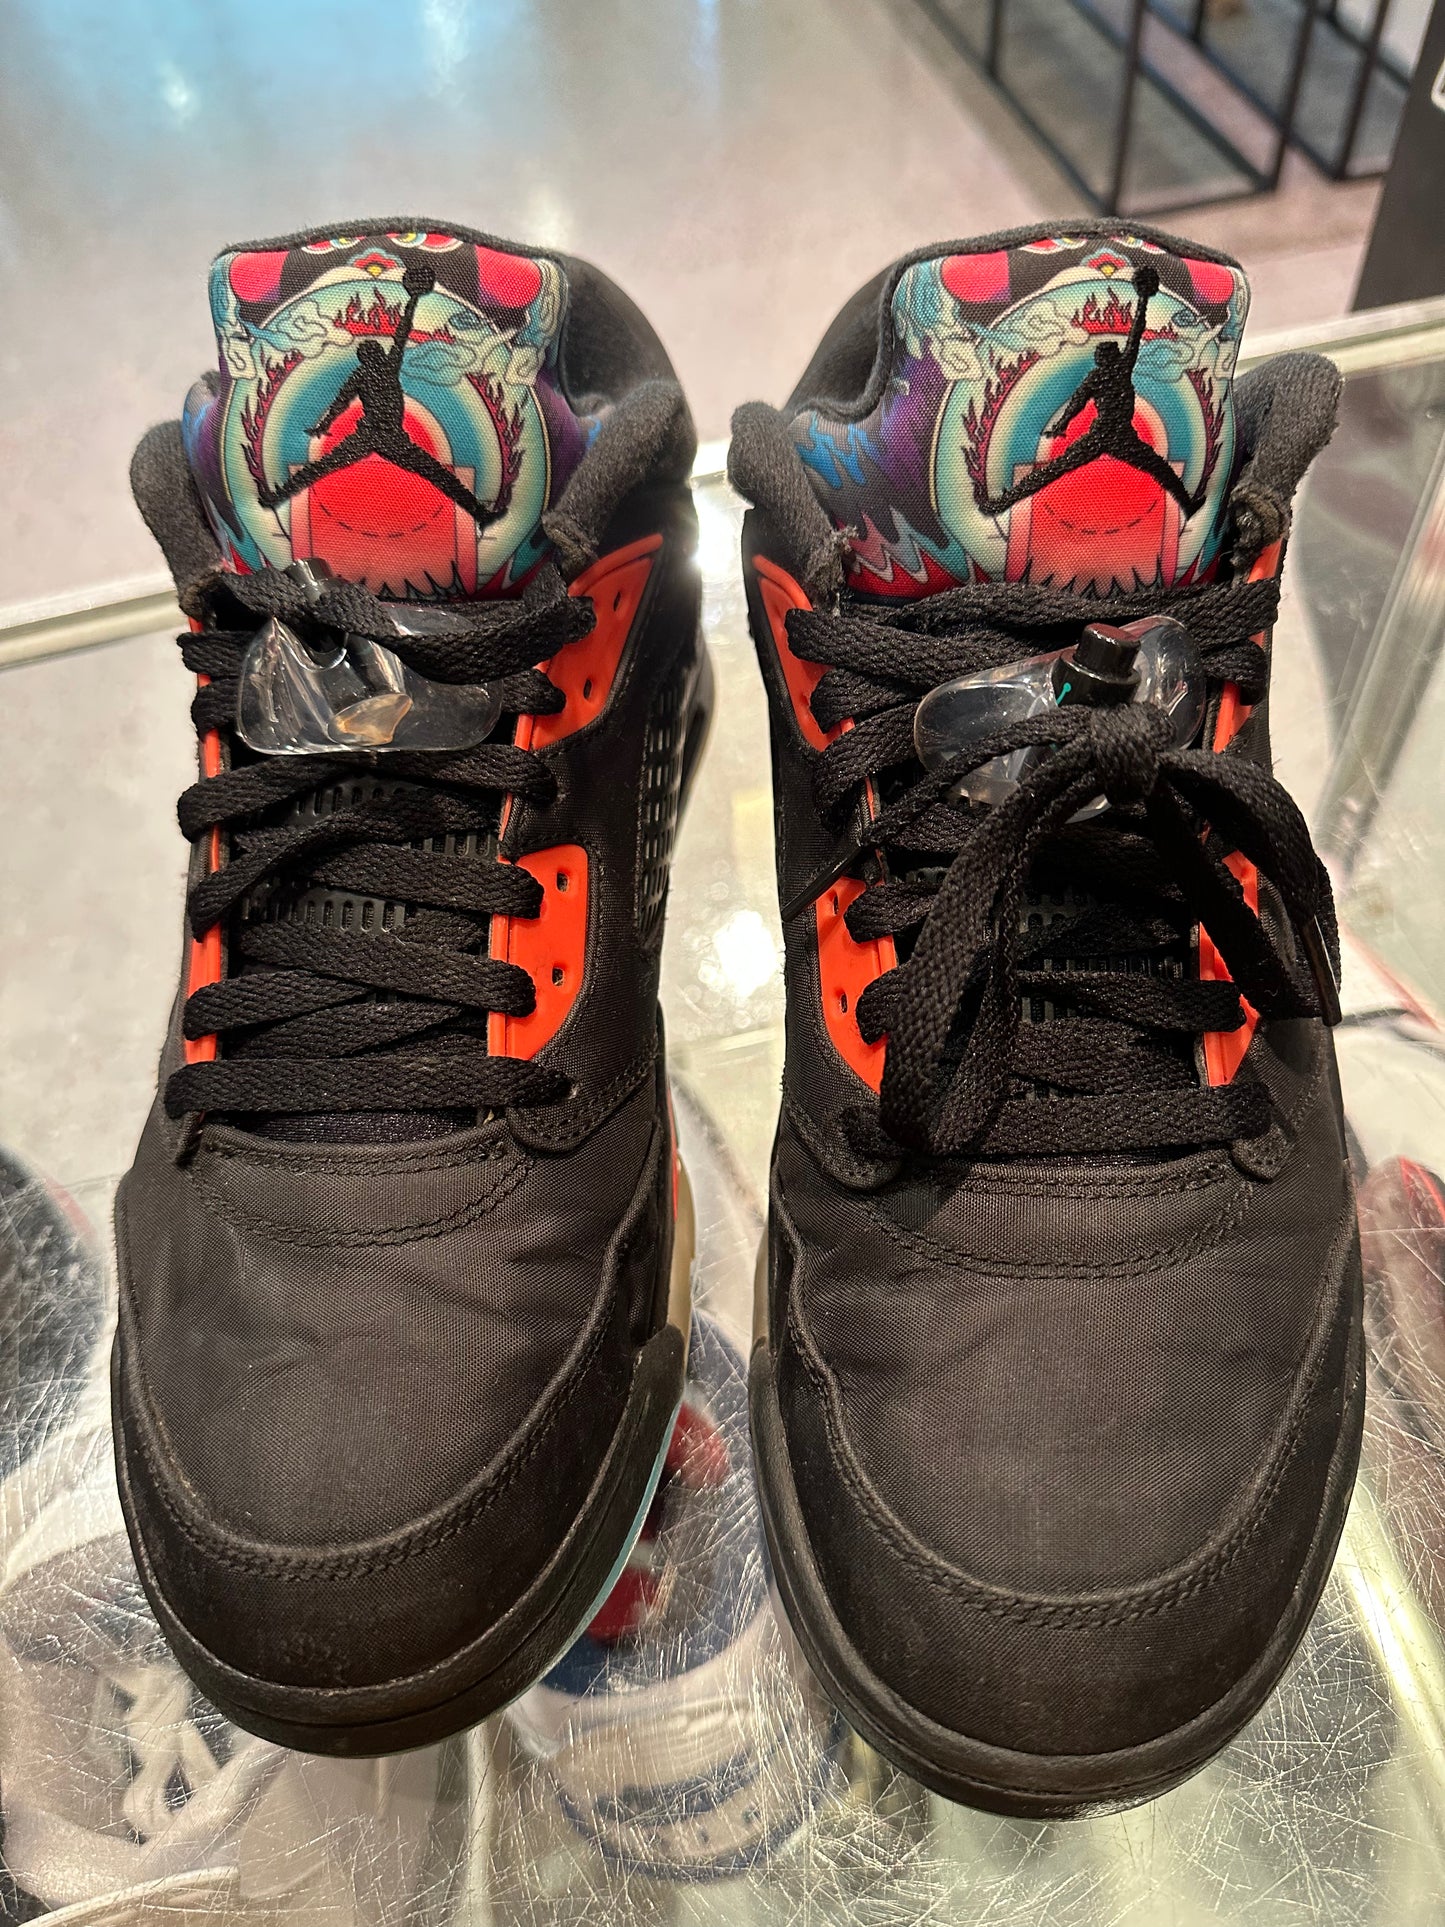 Size 9 Air Jordan 5 Low “Chinese New Year” (Mall)